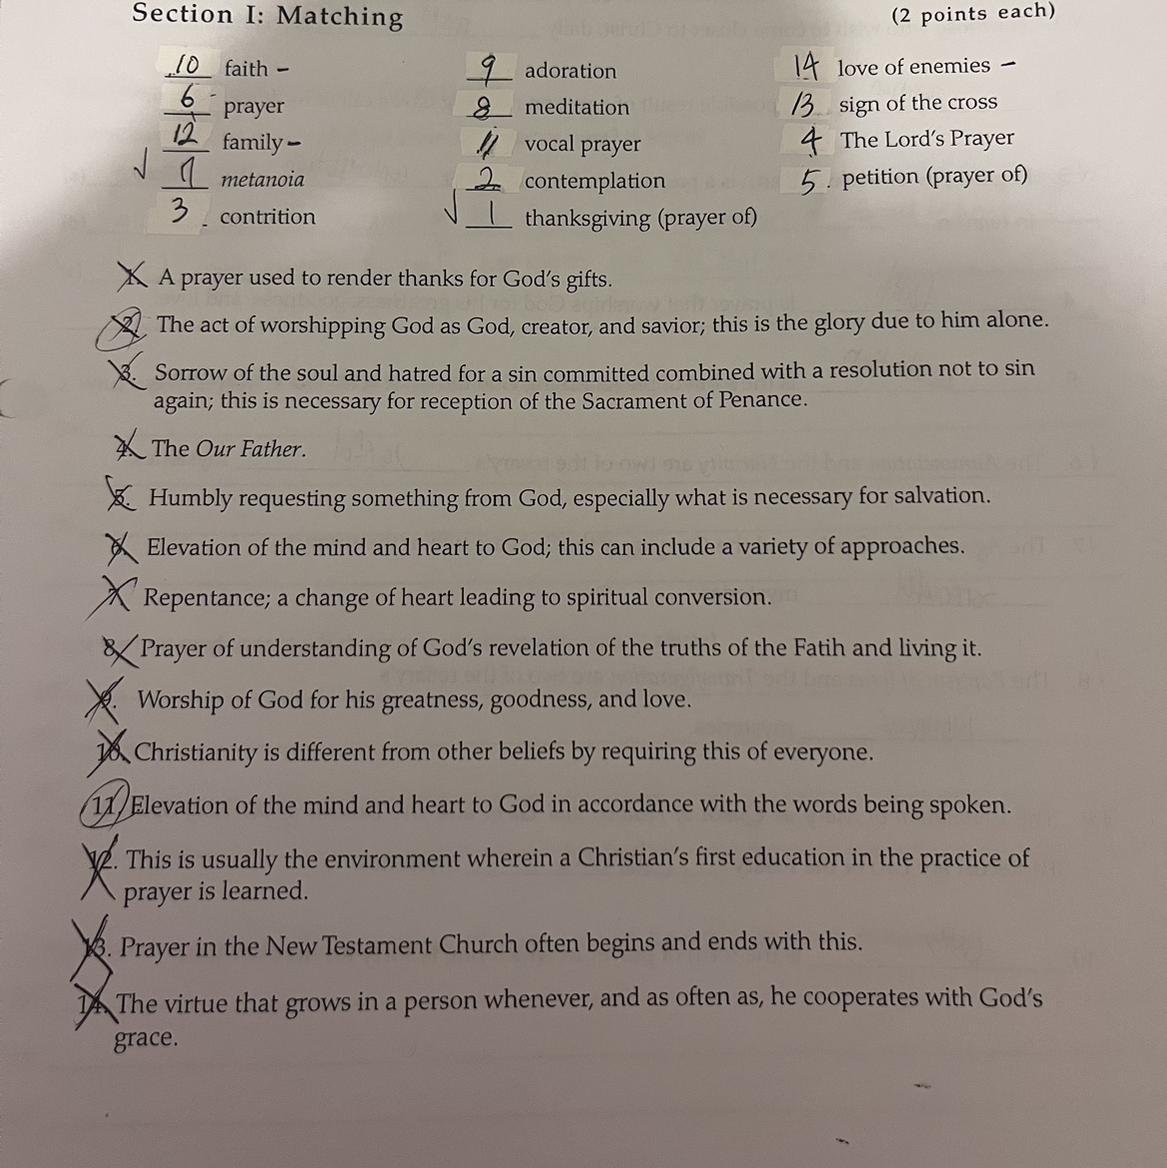 Please Check If These Answers Are Correct. If The Answer Is Wrong, Please Correct It